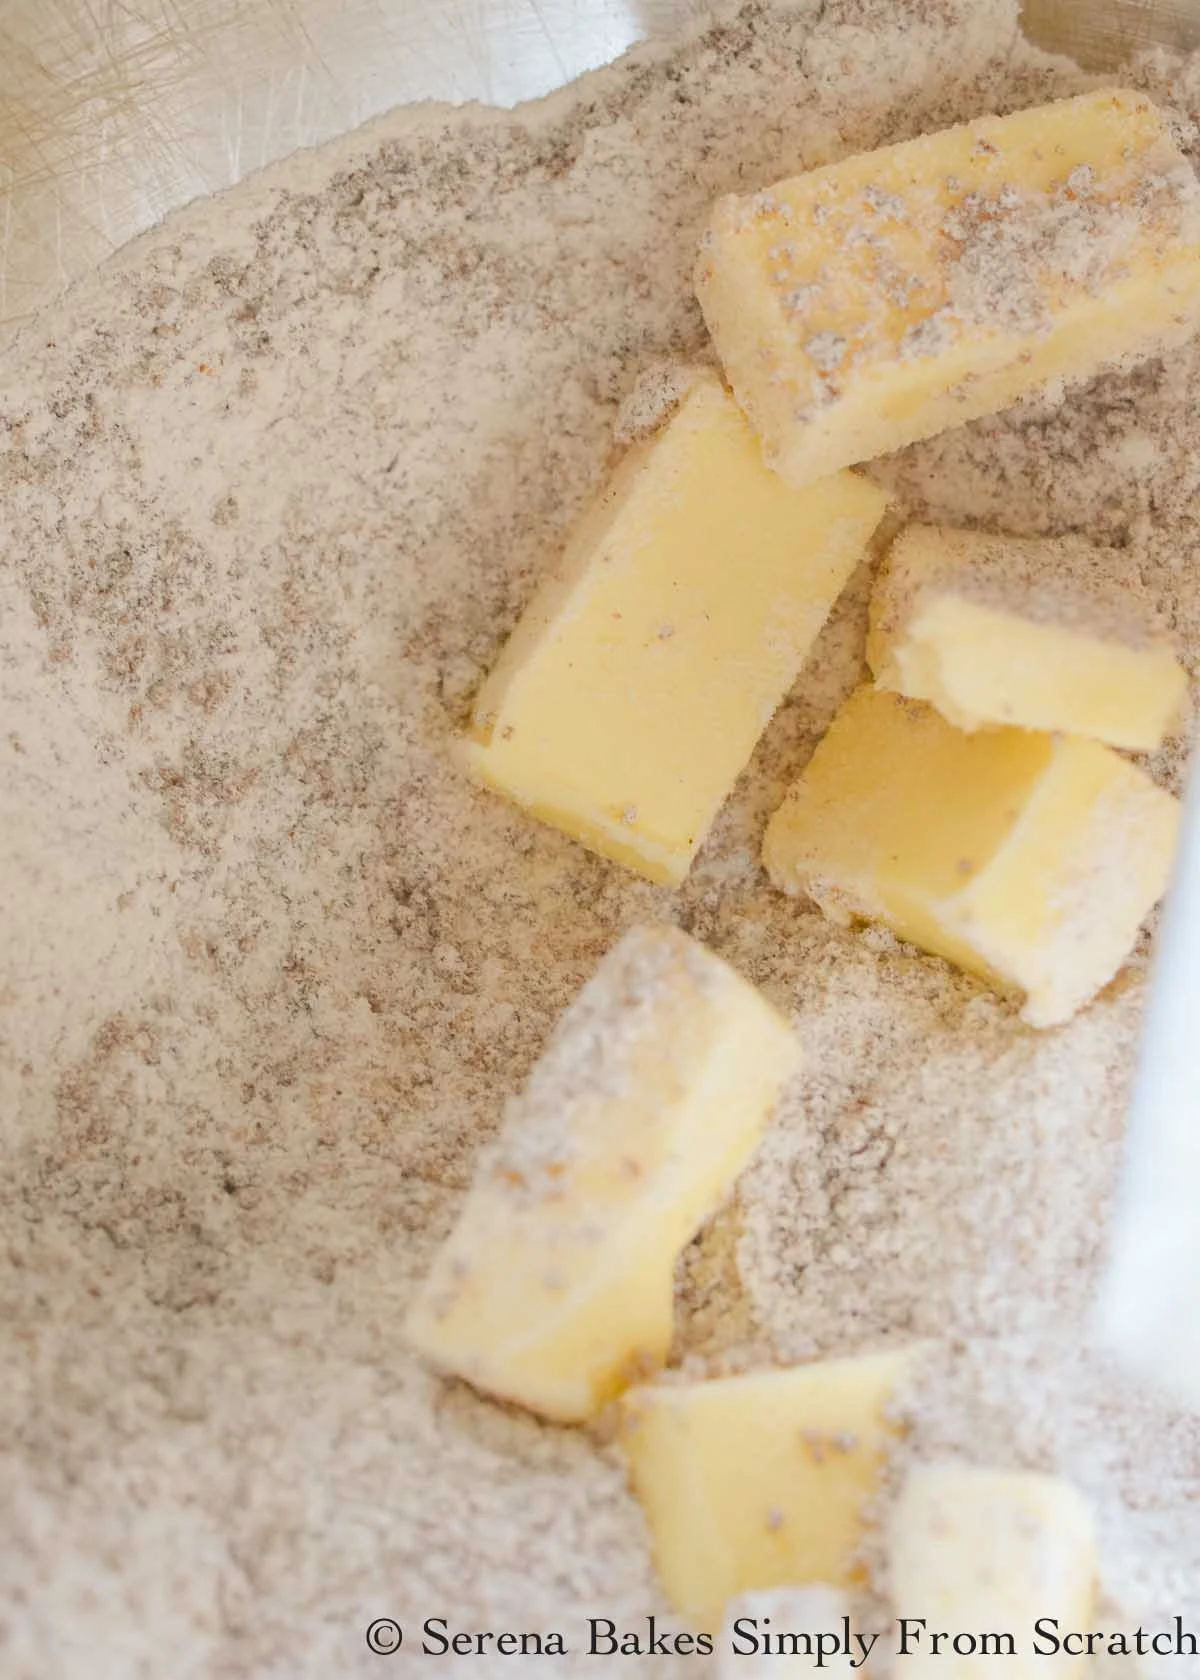 Cold butter added to flour and sugar mixture.